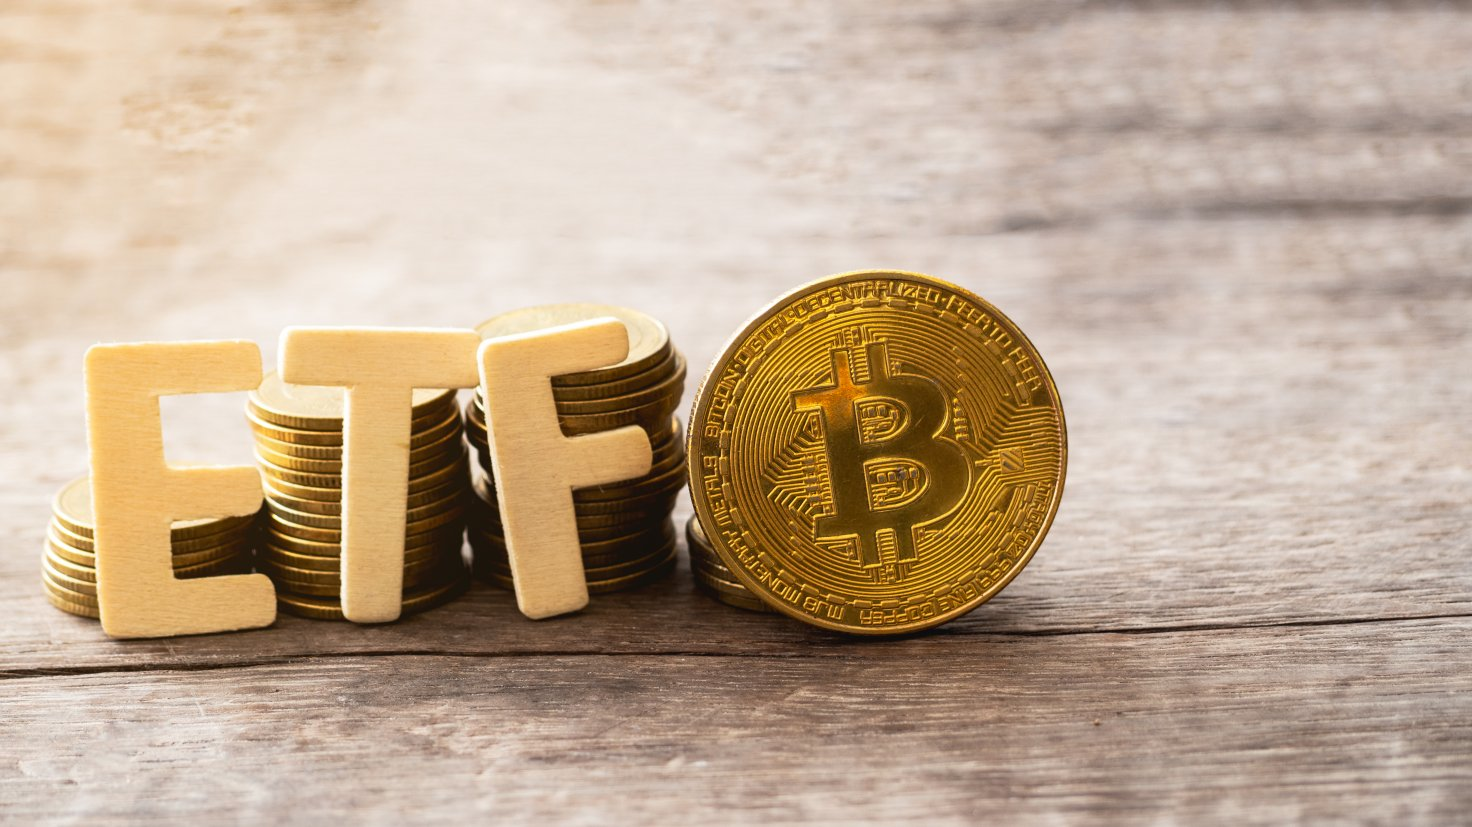 Physical Bitcoin tokens and wooden ETF letters combined for blockchain trends article.